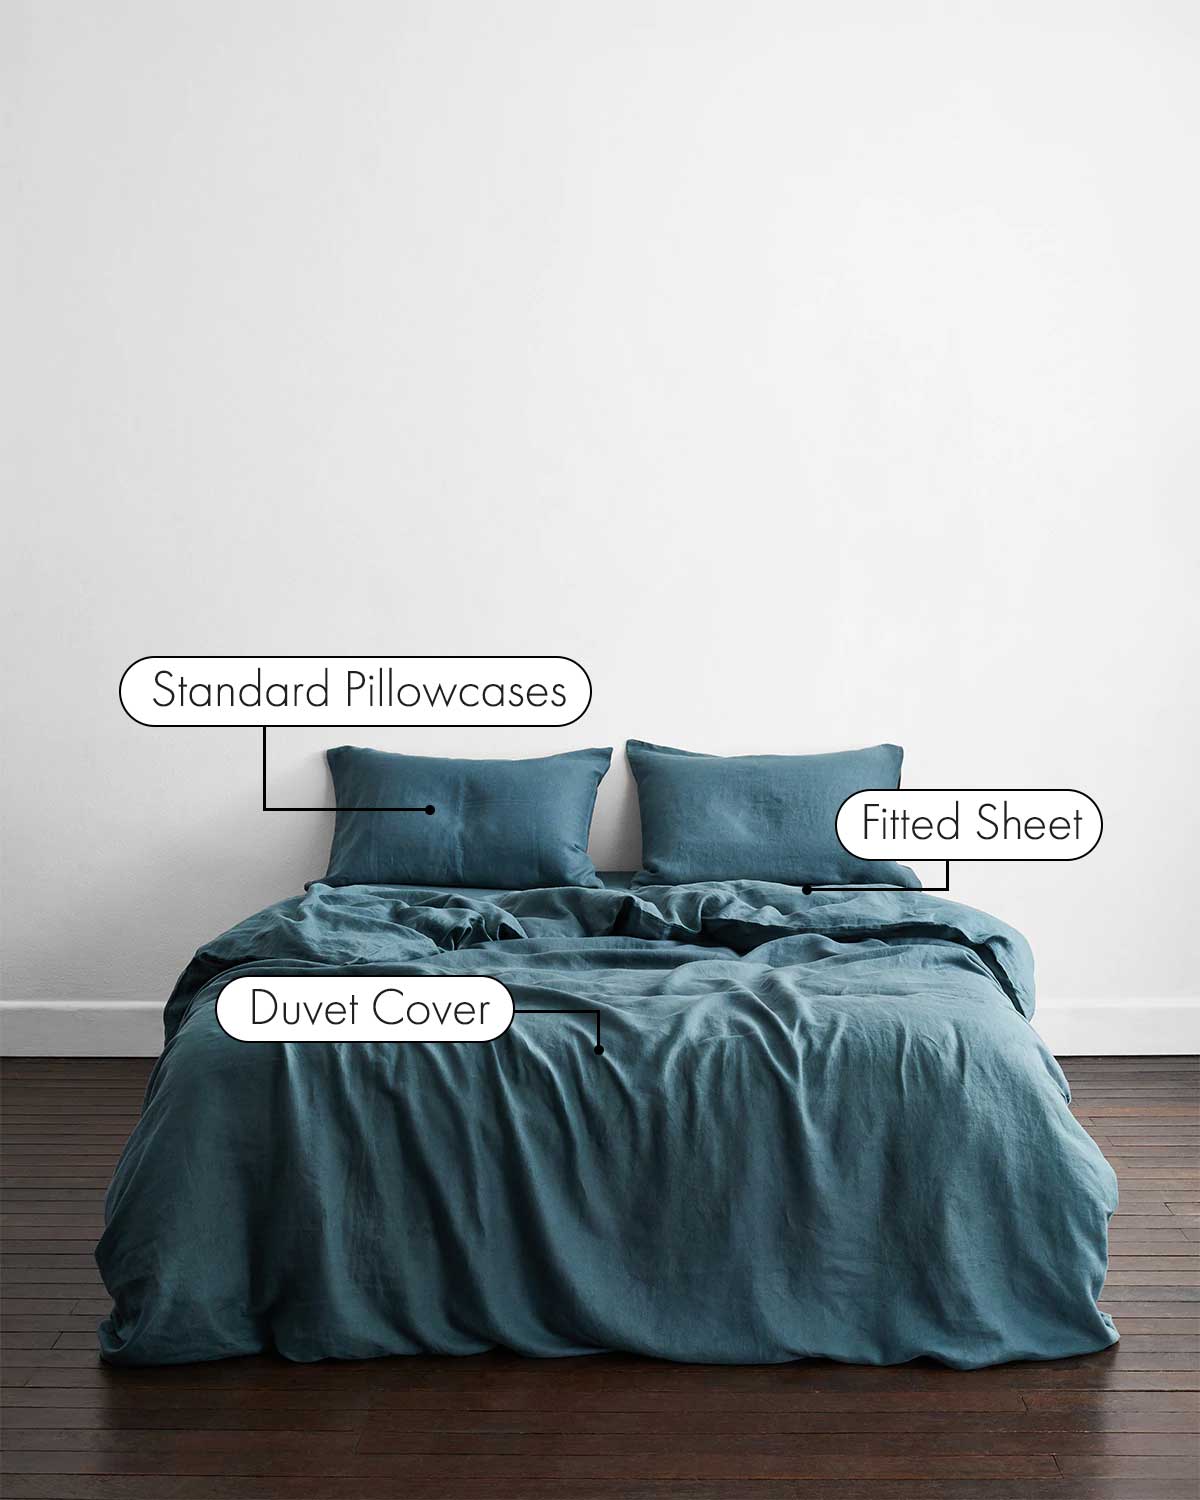 Bed Sheet Size Guide NZ, Sheets, Duvets & Pillowcase Sizes Dimensions